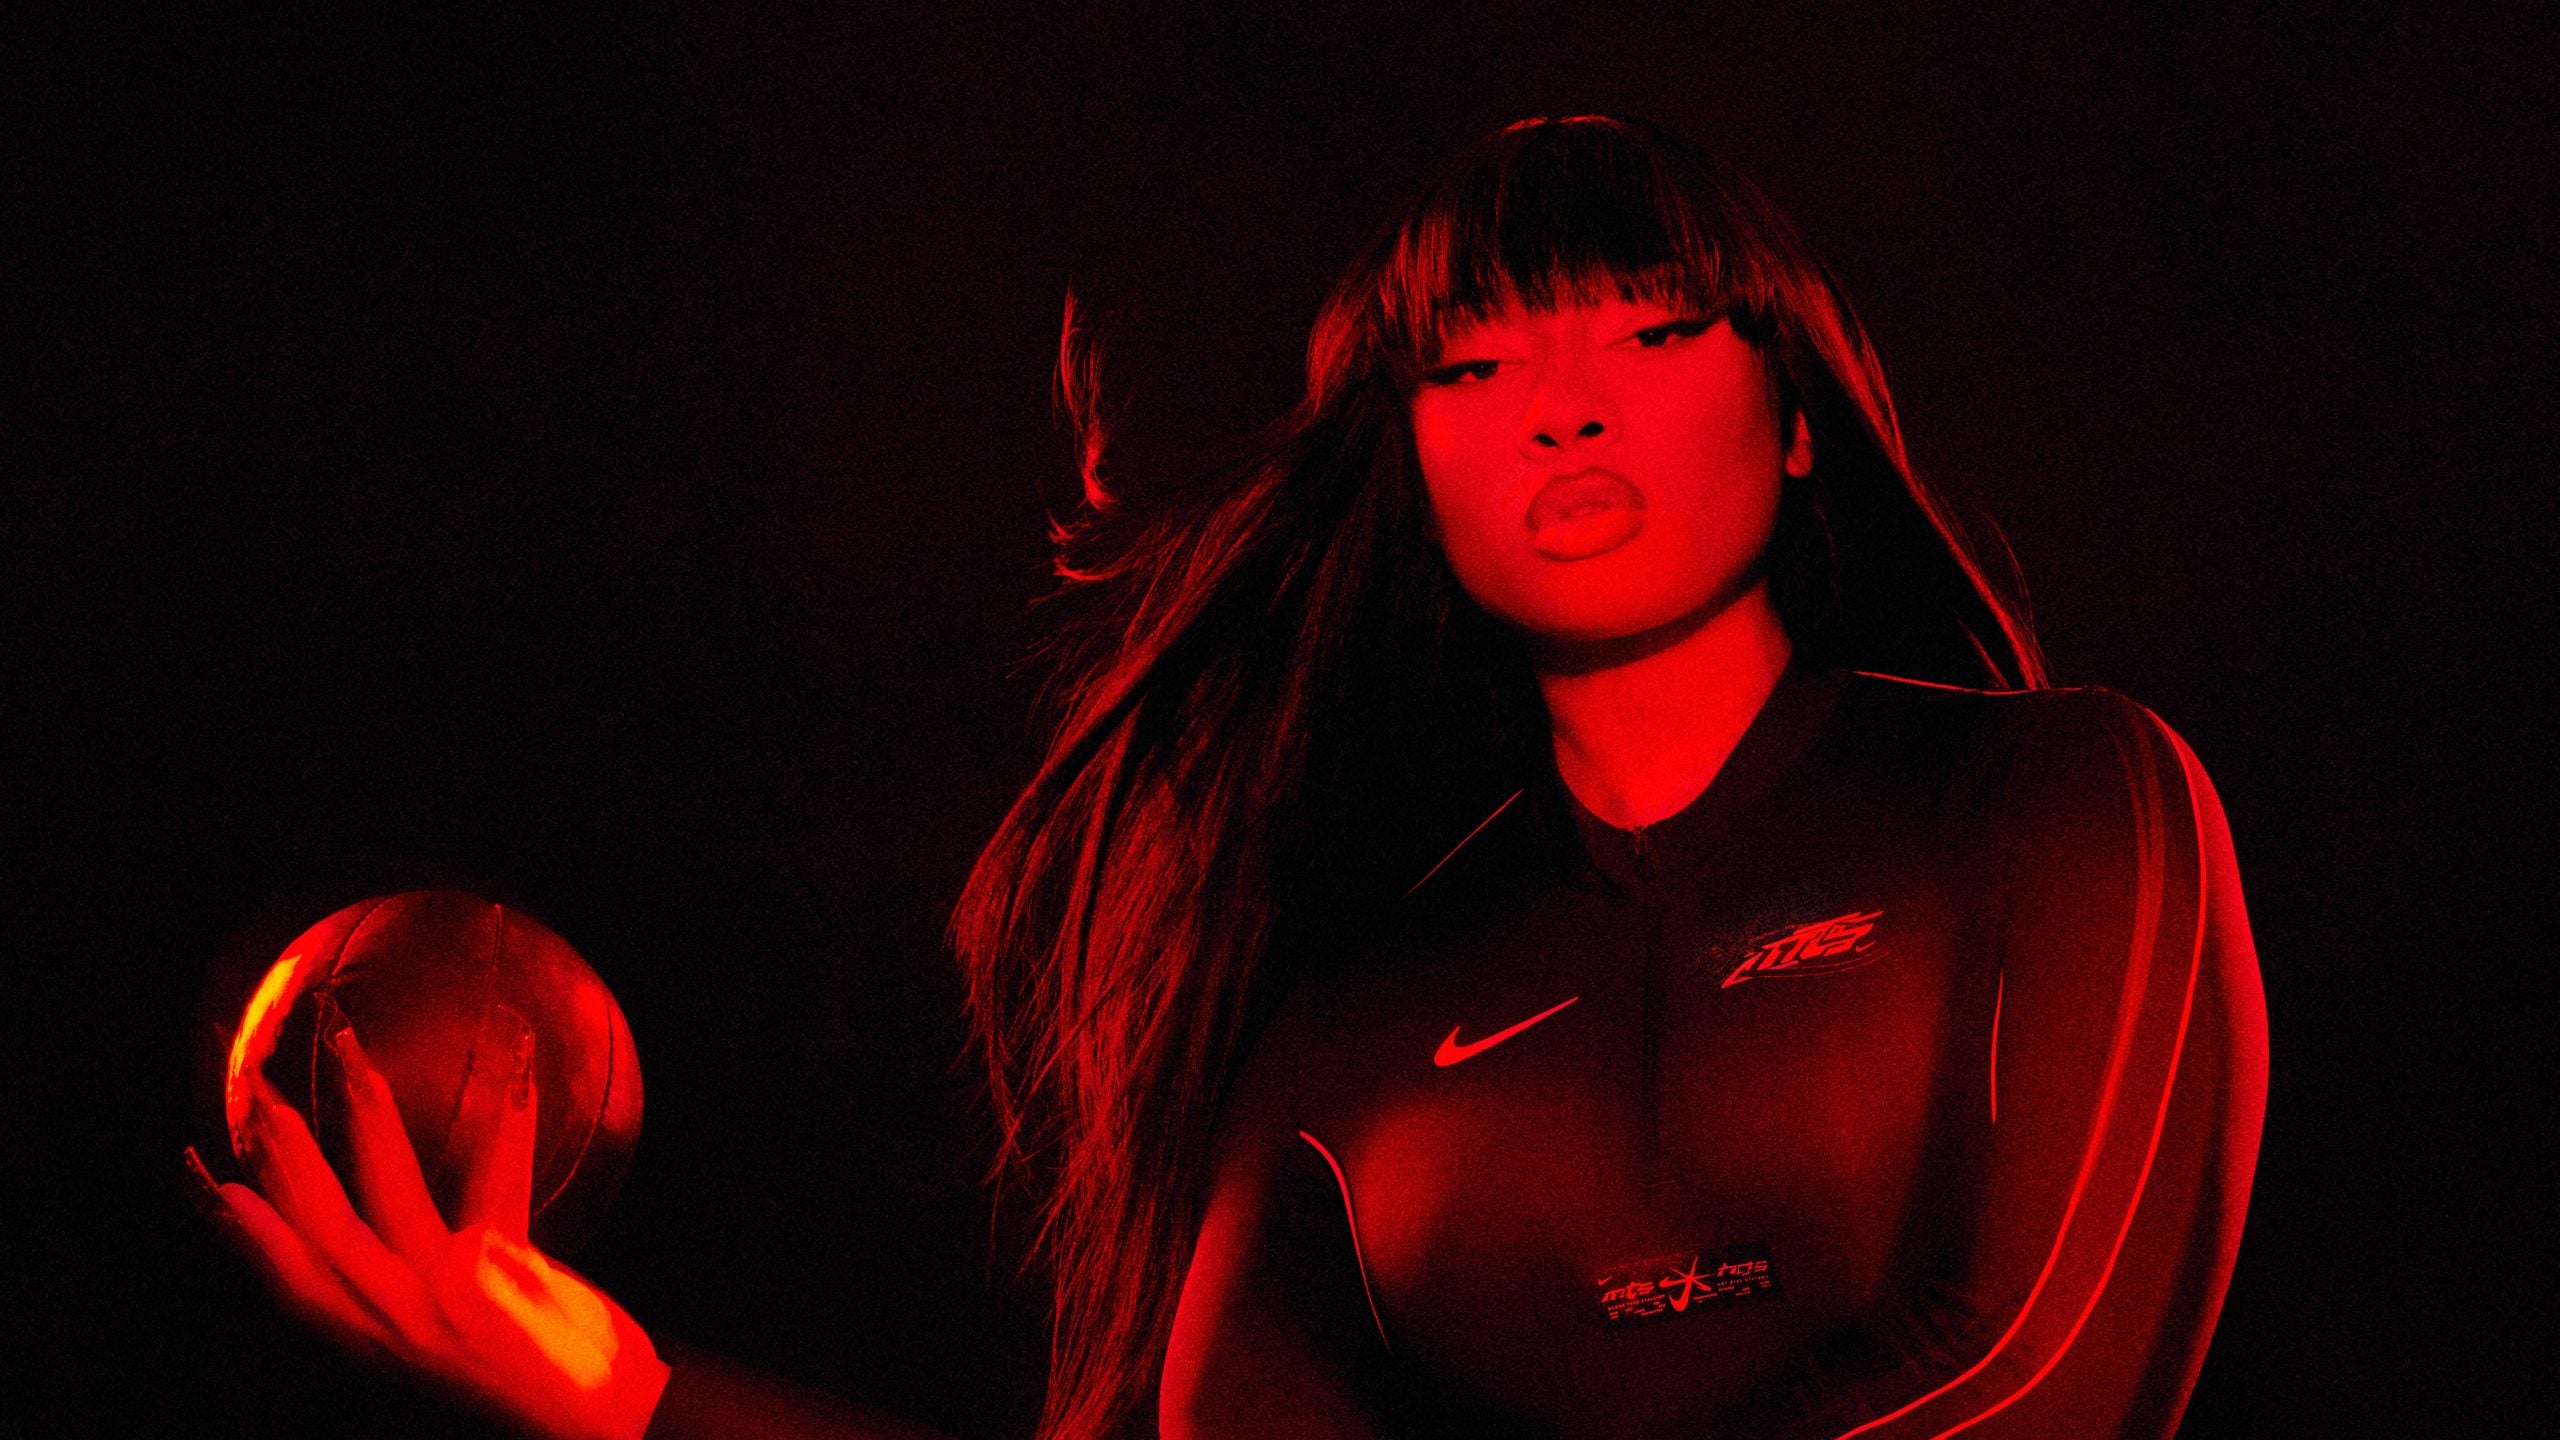 Nike Teams Up With Megan Thee Stallion On An Inclusive Collaboration Celebrating All Bodies